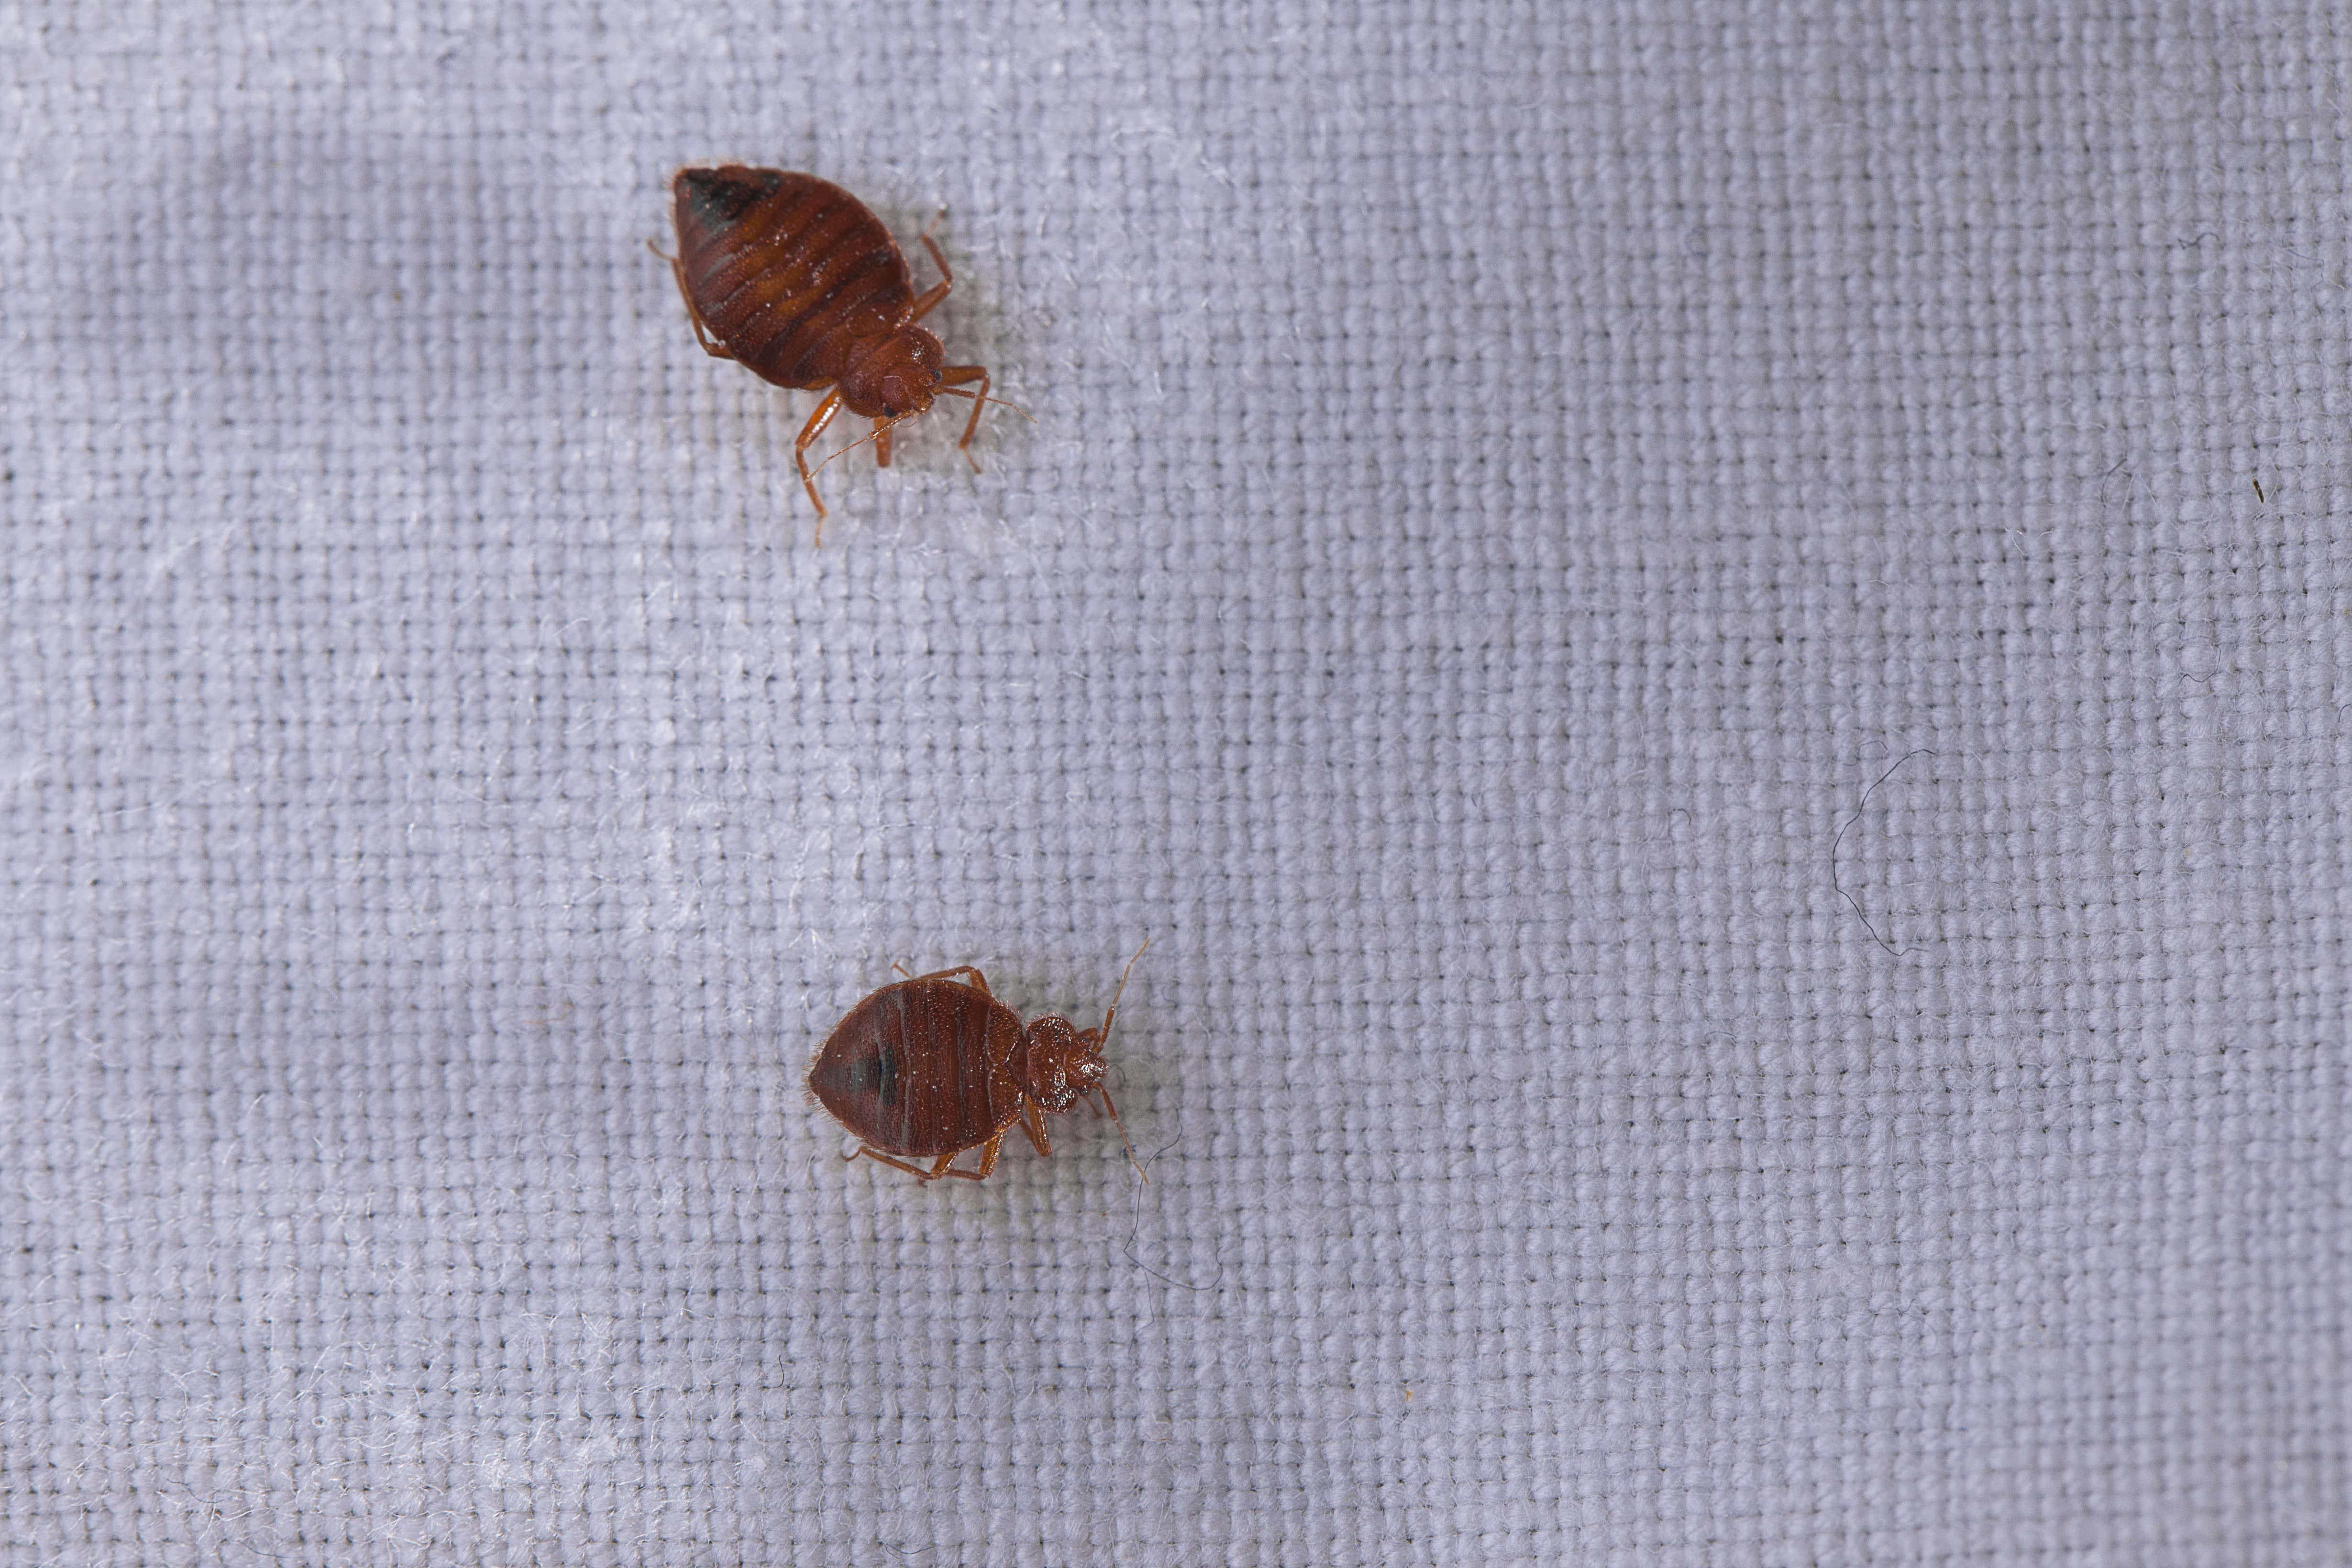 get rid of bed bugs fast